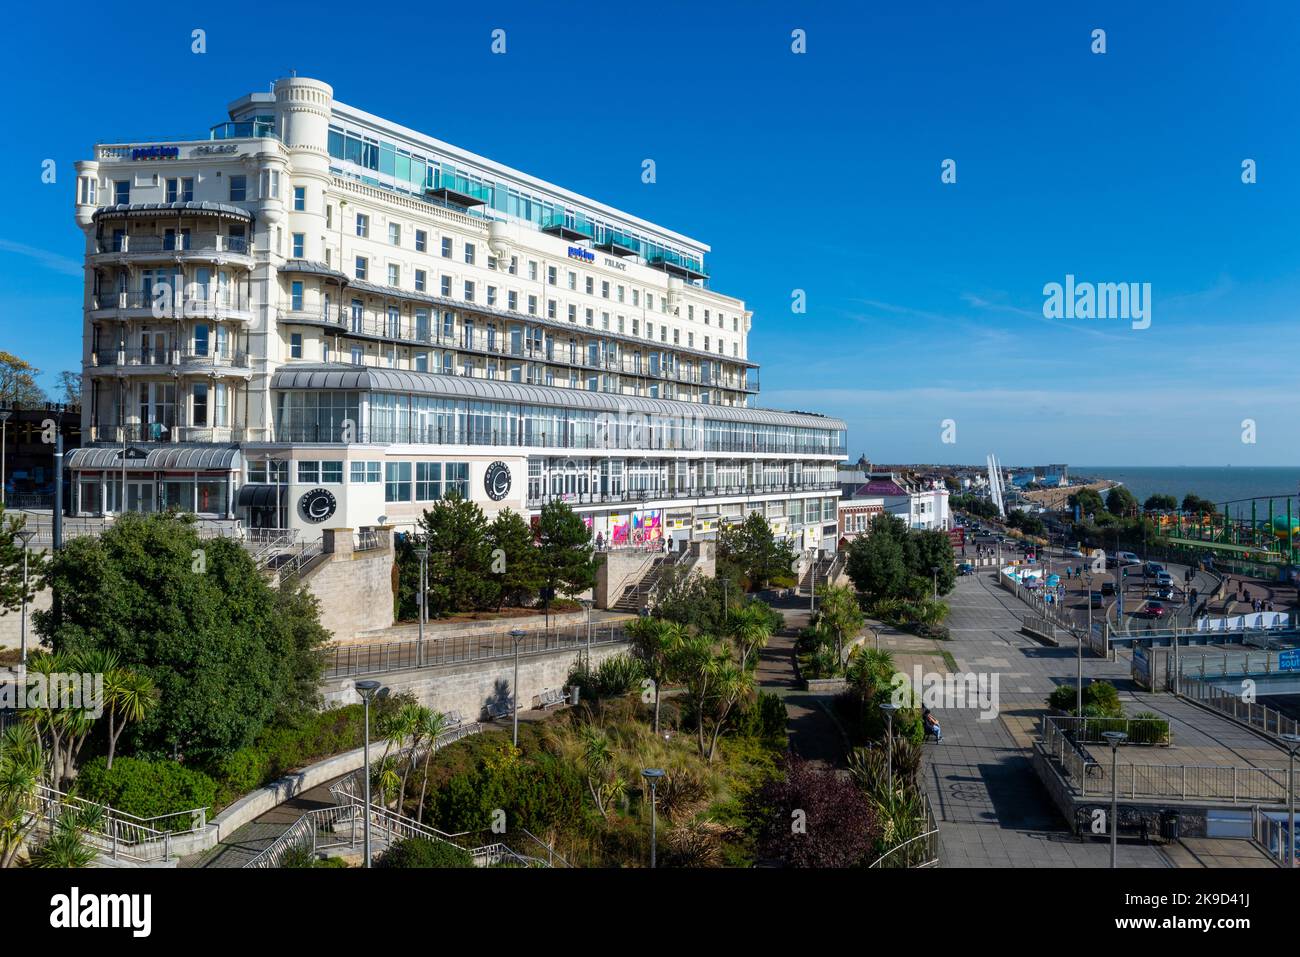 Park Inn Palace Hotel, by Radisson Palace, on Pier Hill overlooking the seafront at Southend-on-Sea, Essex. Seaside attractions and coast of estuary Stock Photo